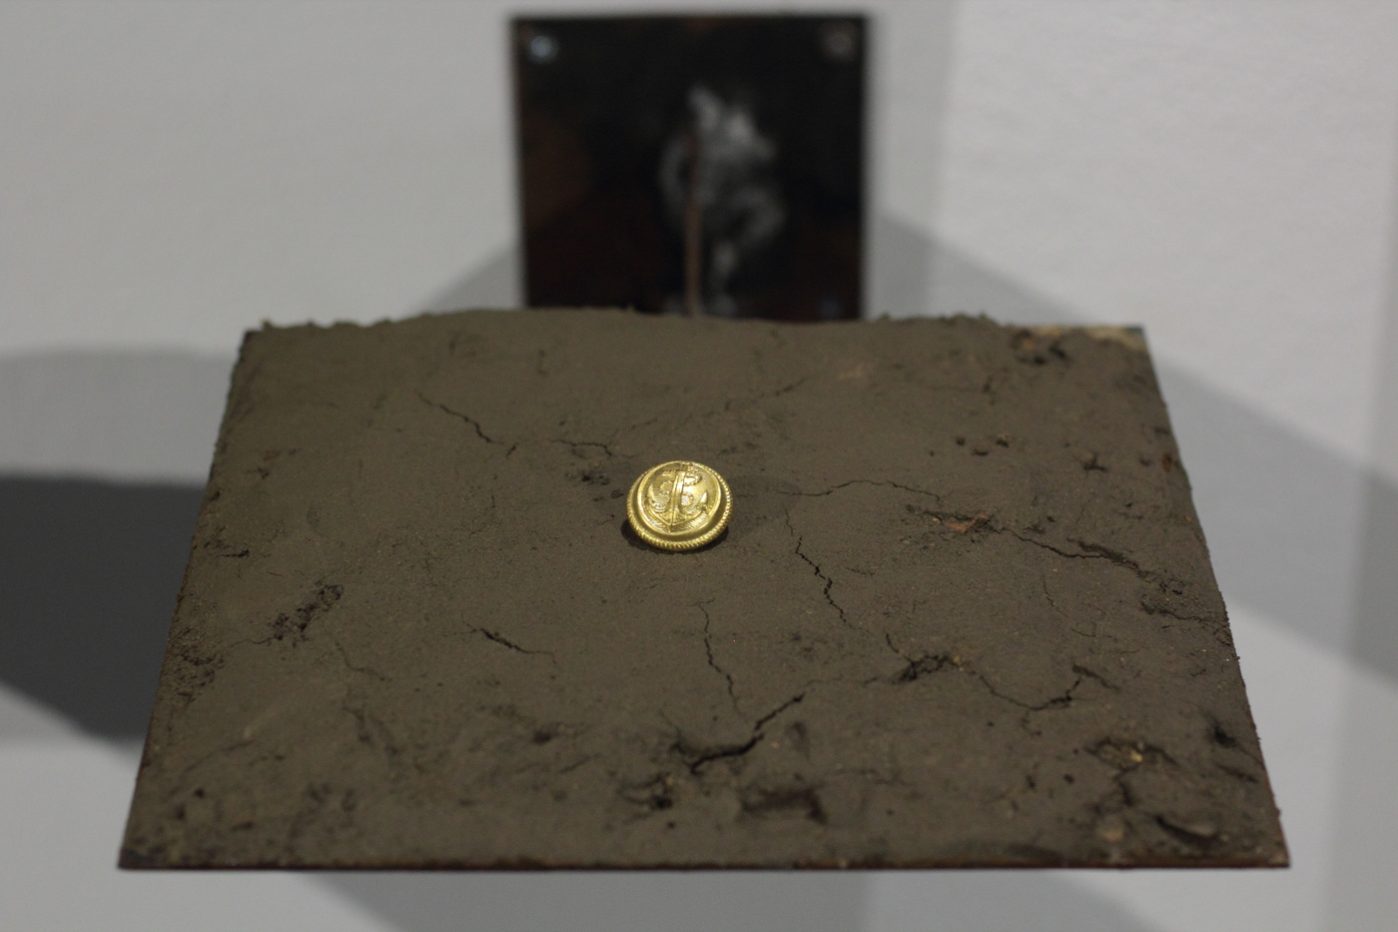 The fever (numismatic value), Steel, soil samples, brass, printing, etching. 2013, installation